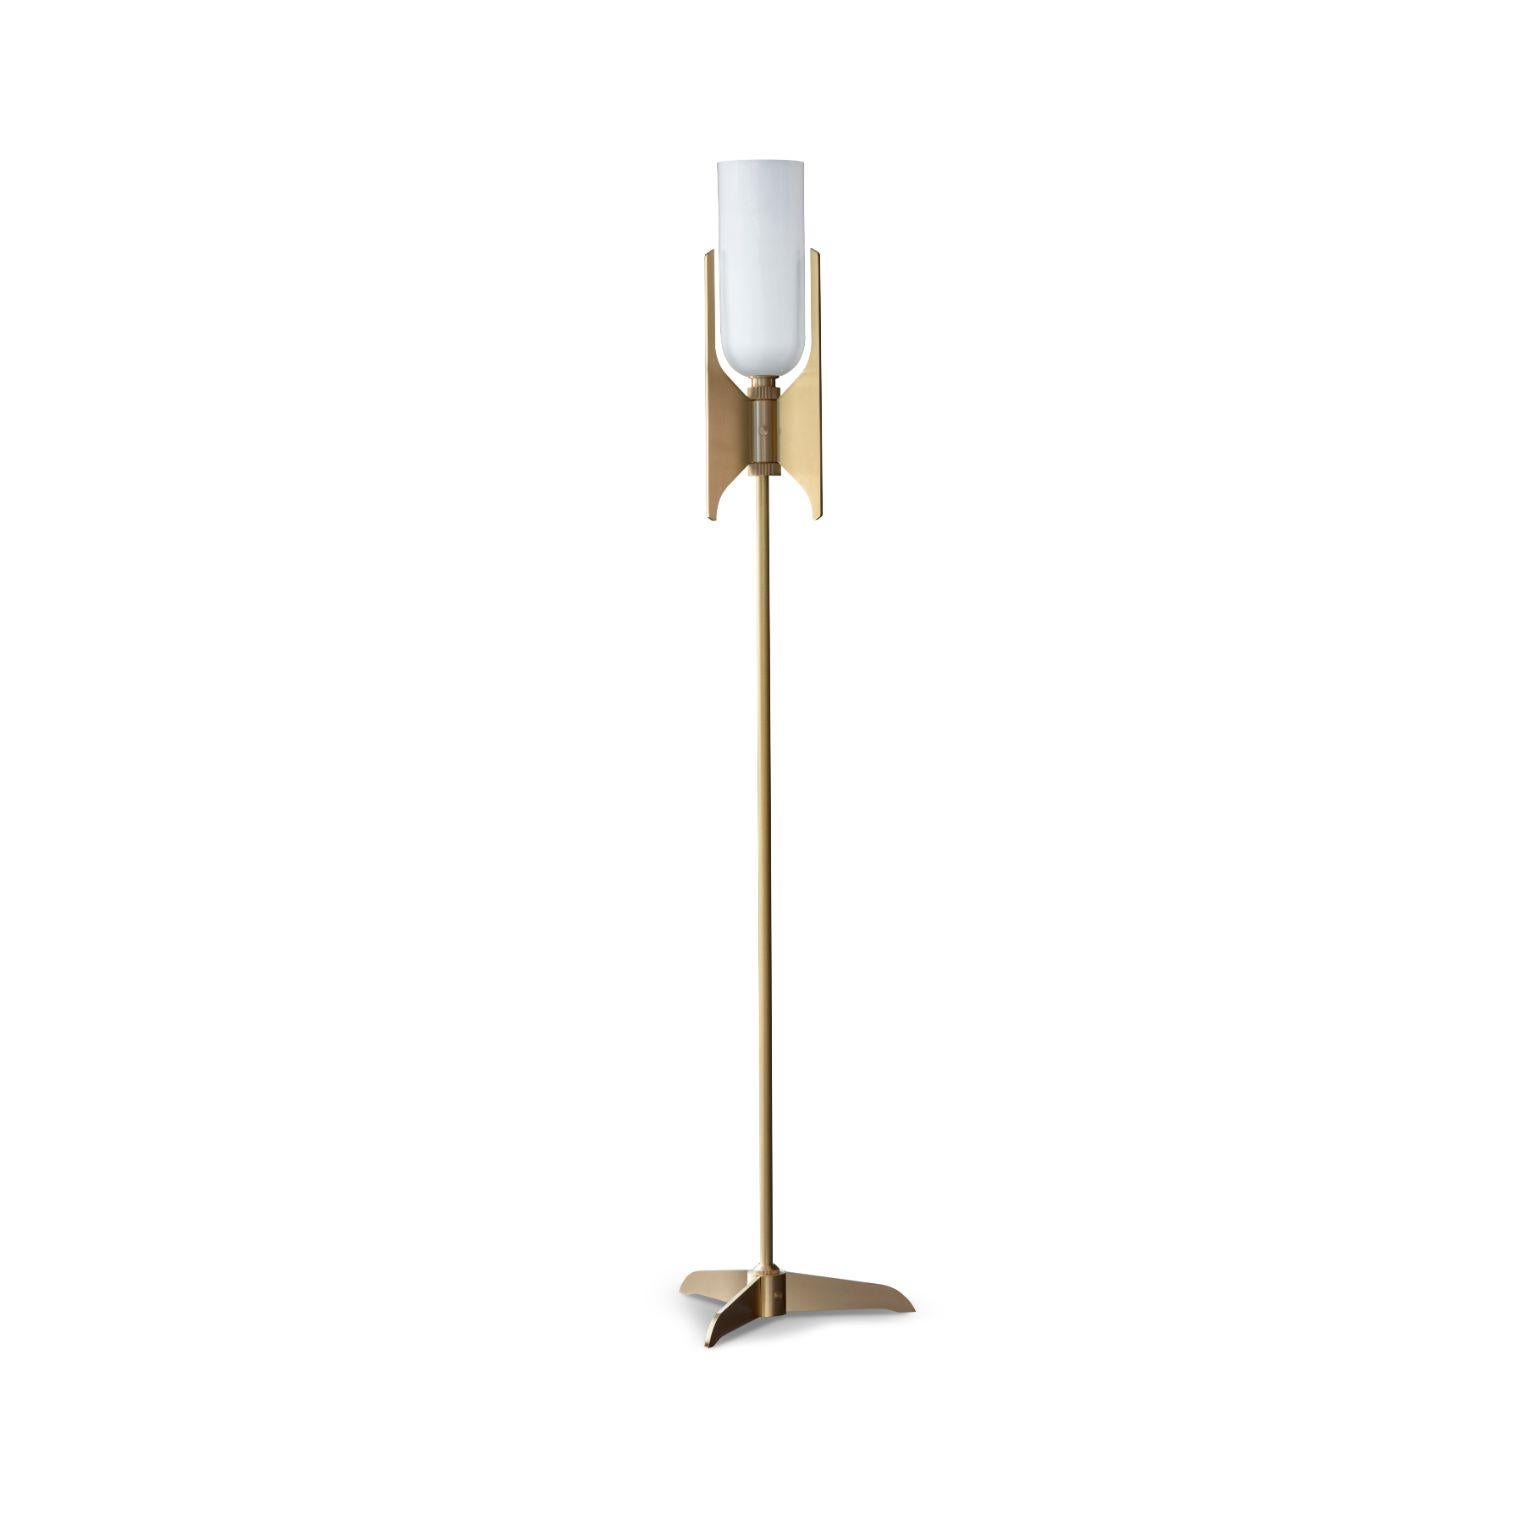 Pennon floor lamp - Brass by Bert Frank
Dimensions: 140.5 x 37.9 x 13.9 cm
Materials: Brass, Bone China

When Adam Yeats and Robbie Llewellyn founded Bert Frank in 2013 it was a meeting of minds and the start of a collaborative creative partnership